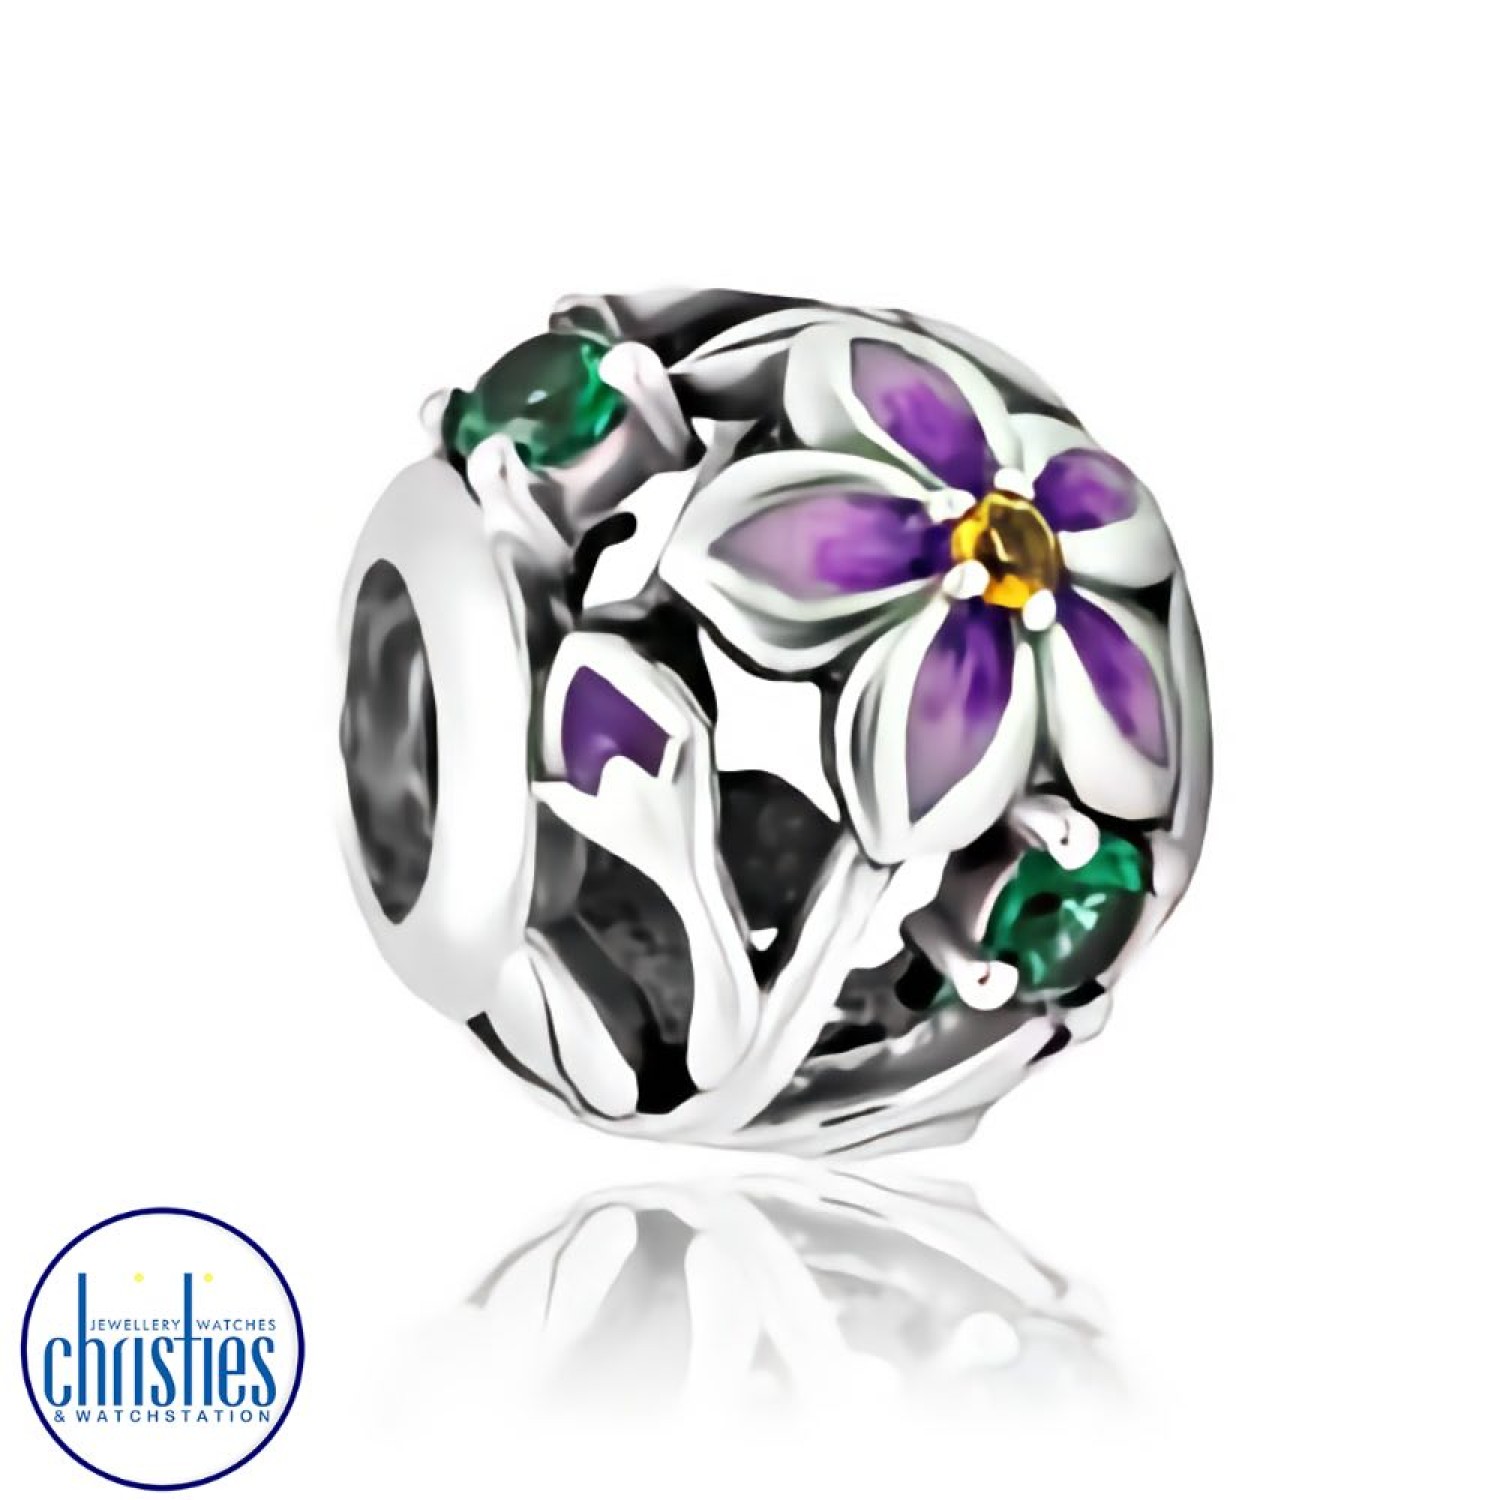 LKE079 Evolve Jewellery Poroporo Charm. With its bright purple petals and golden centre, the Poroporo attracts many native birds to New Zealand gardens.The delicate enamel work and hand-placed cubic zirconia stones on Evolve's Poroporo charm emulate its a